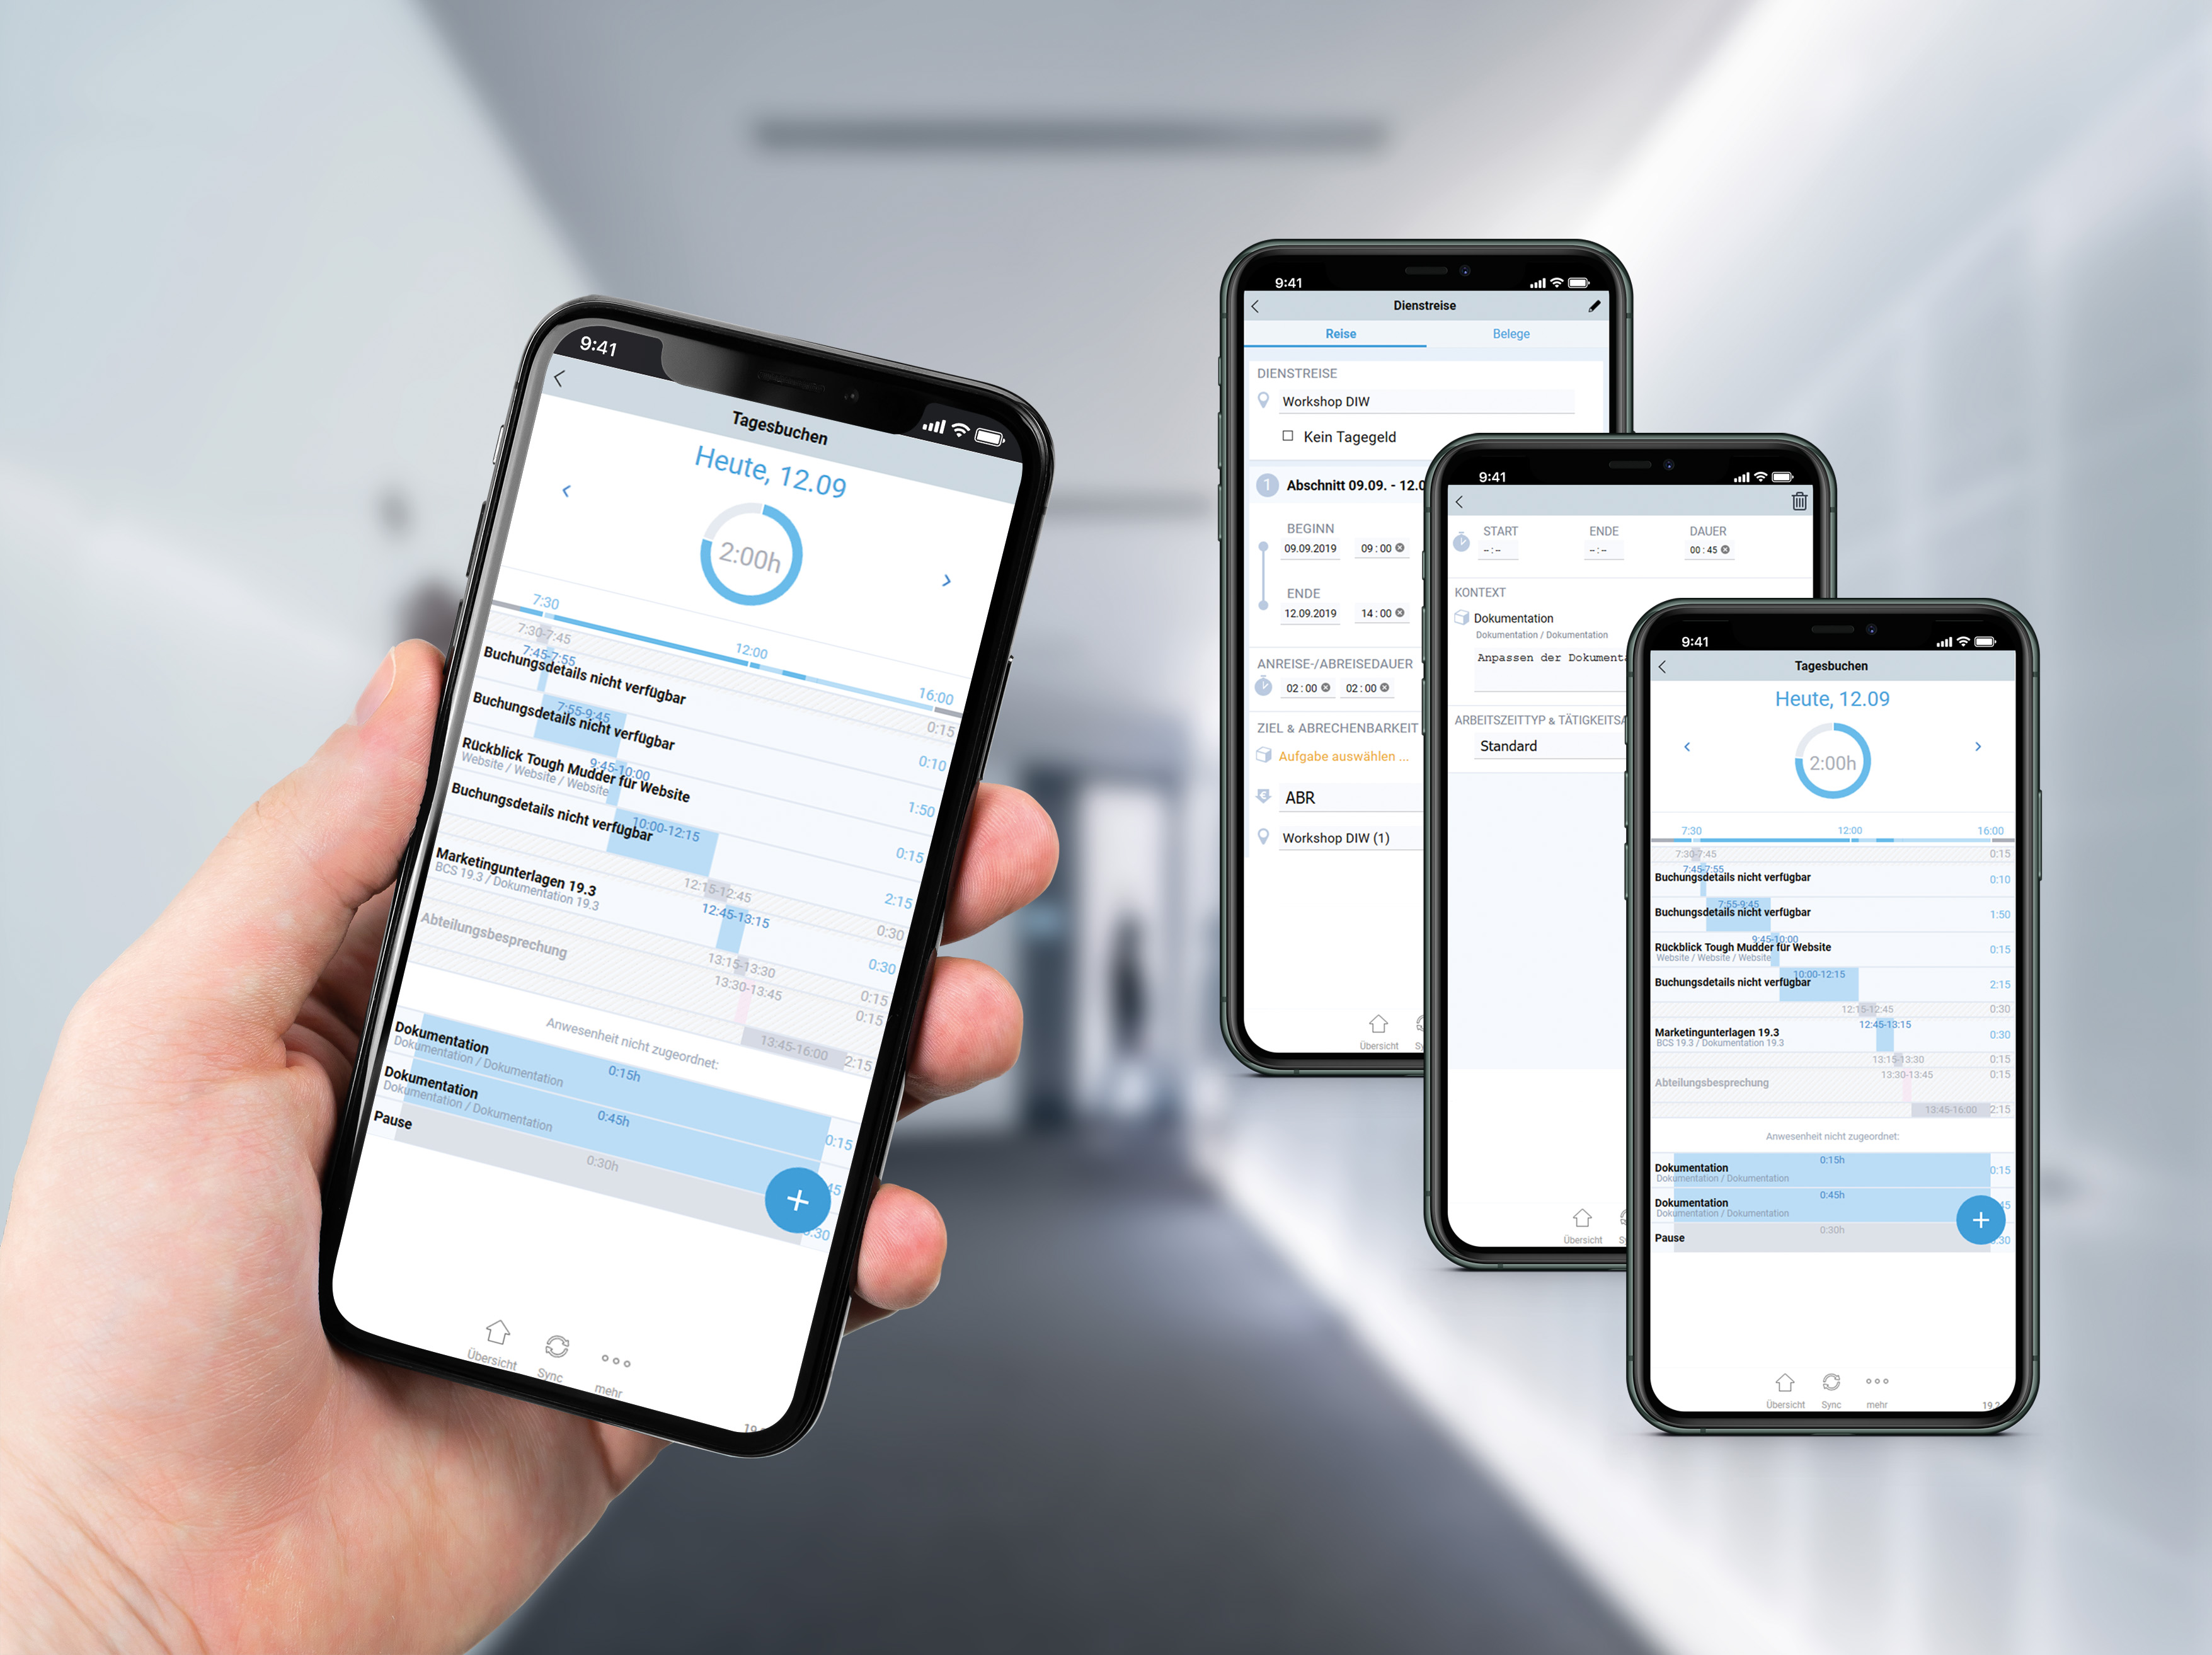 With the Projektron WebApp you can record attendances, project times, working hours, contacts and expenses anytime and anywhere in an uncomplicated way.